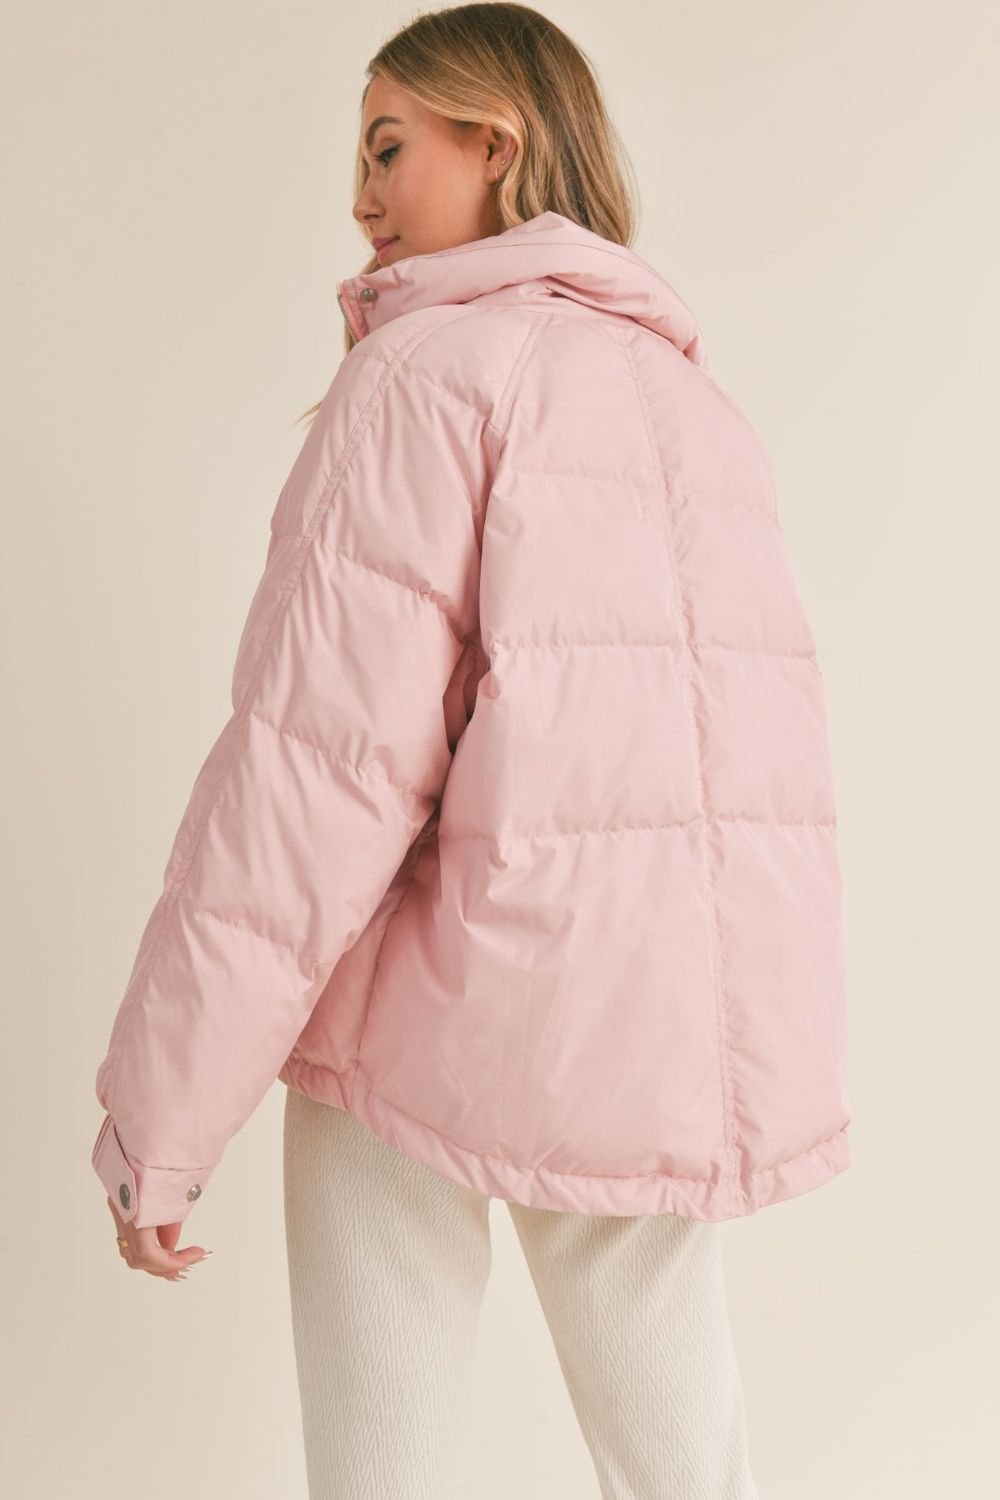 Women&#39;s Quilted Puffer Jacket | Winter Coat | Pink - Women&#39;s Jacket - Blooming Daily